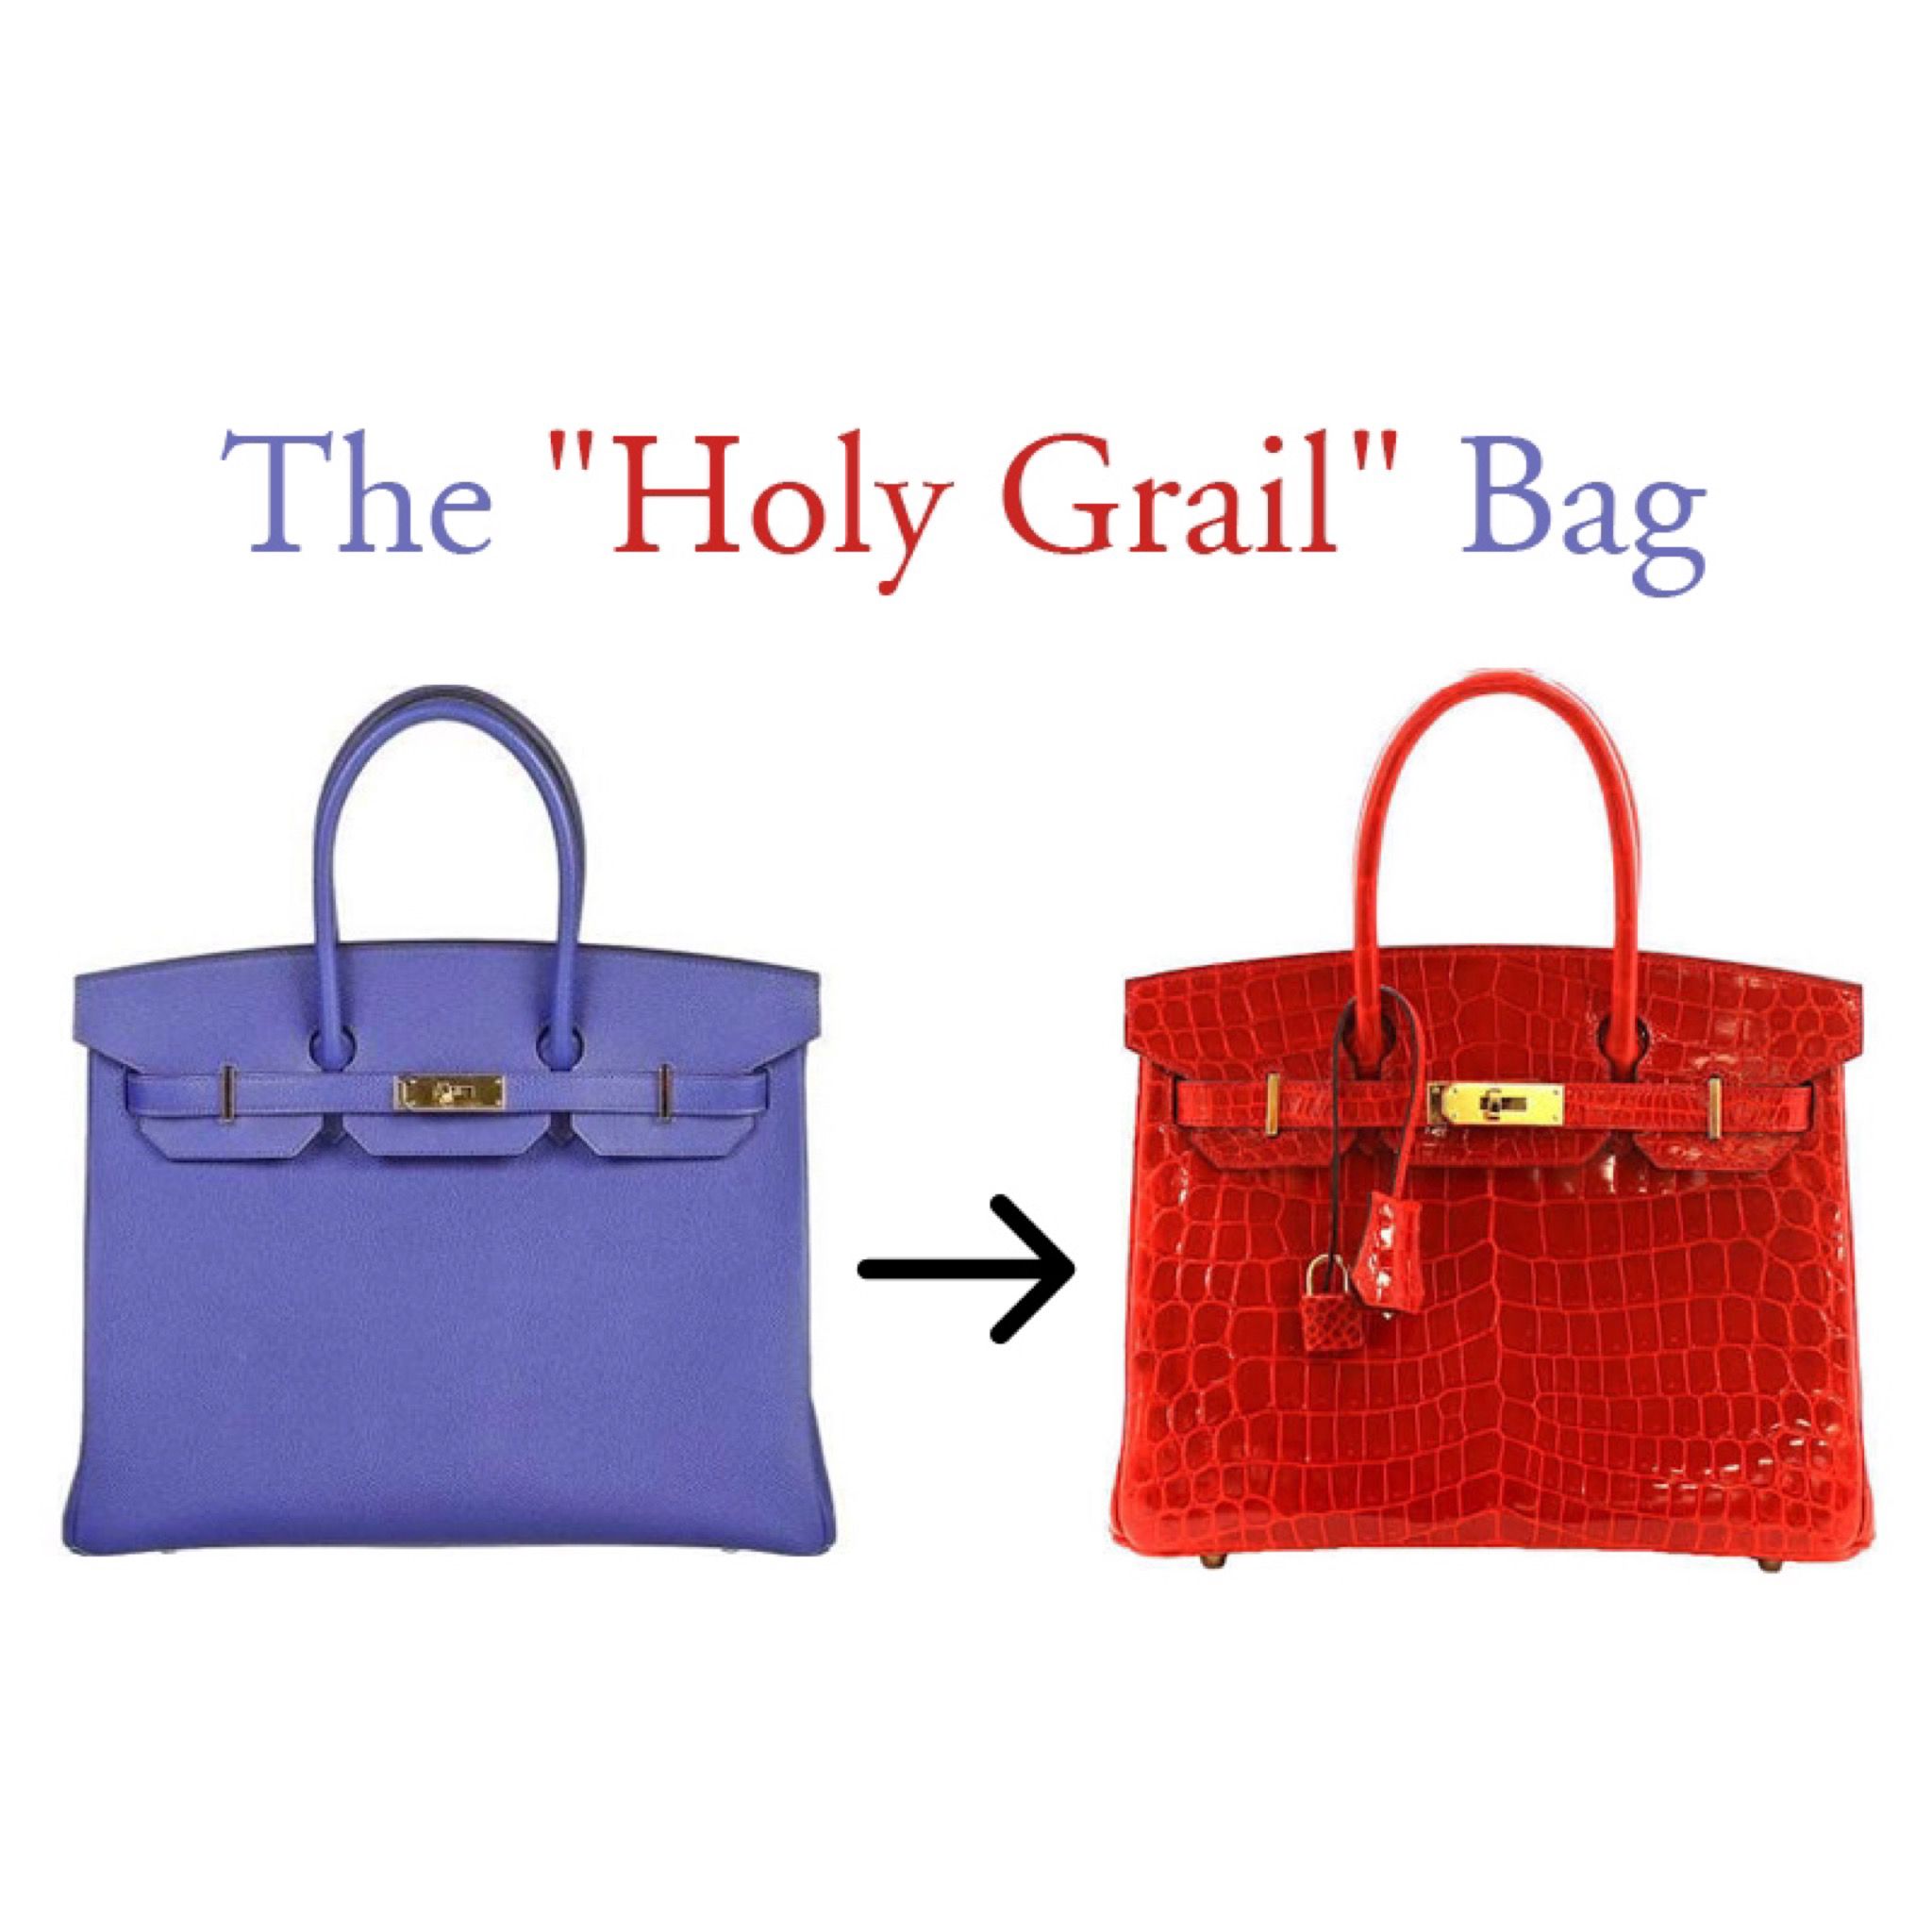 10 Facts About Buying an Hermes Birkin Bag